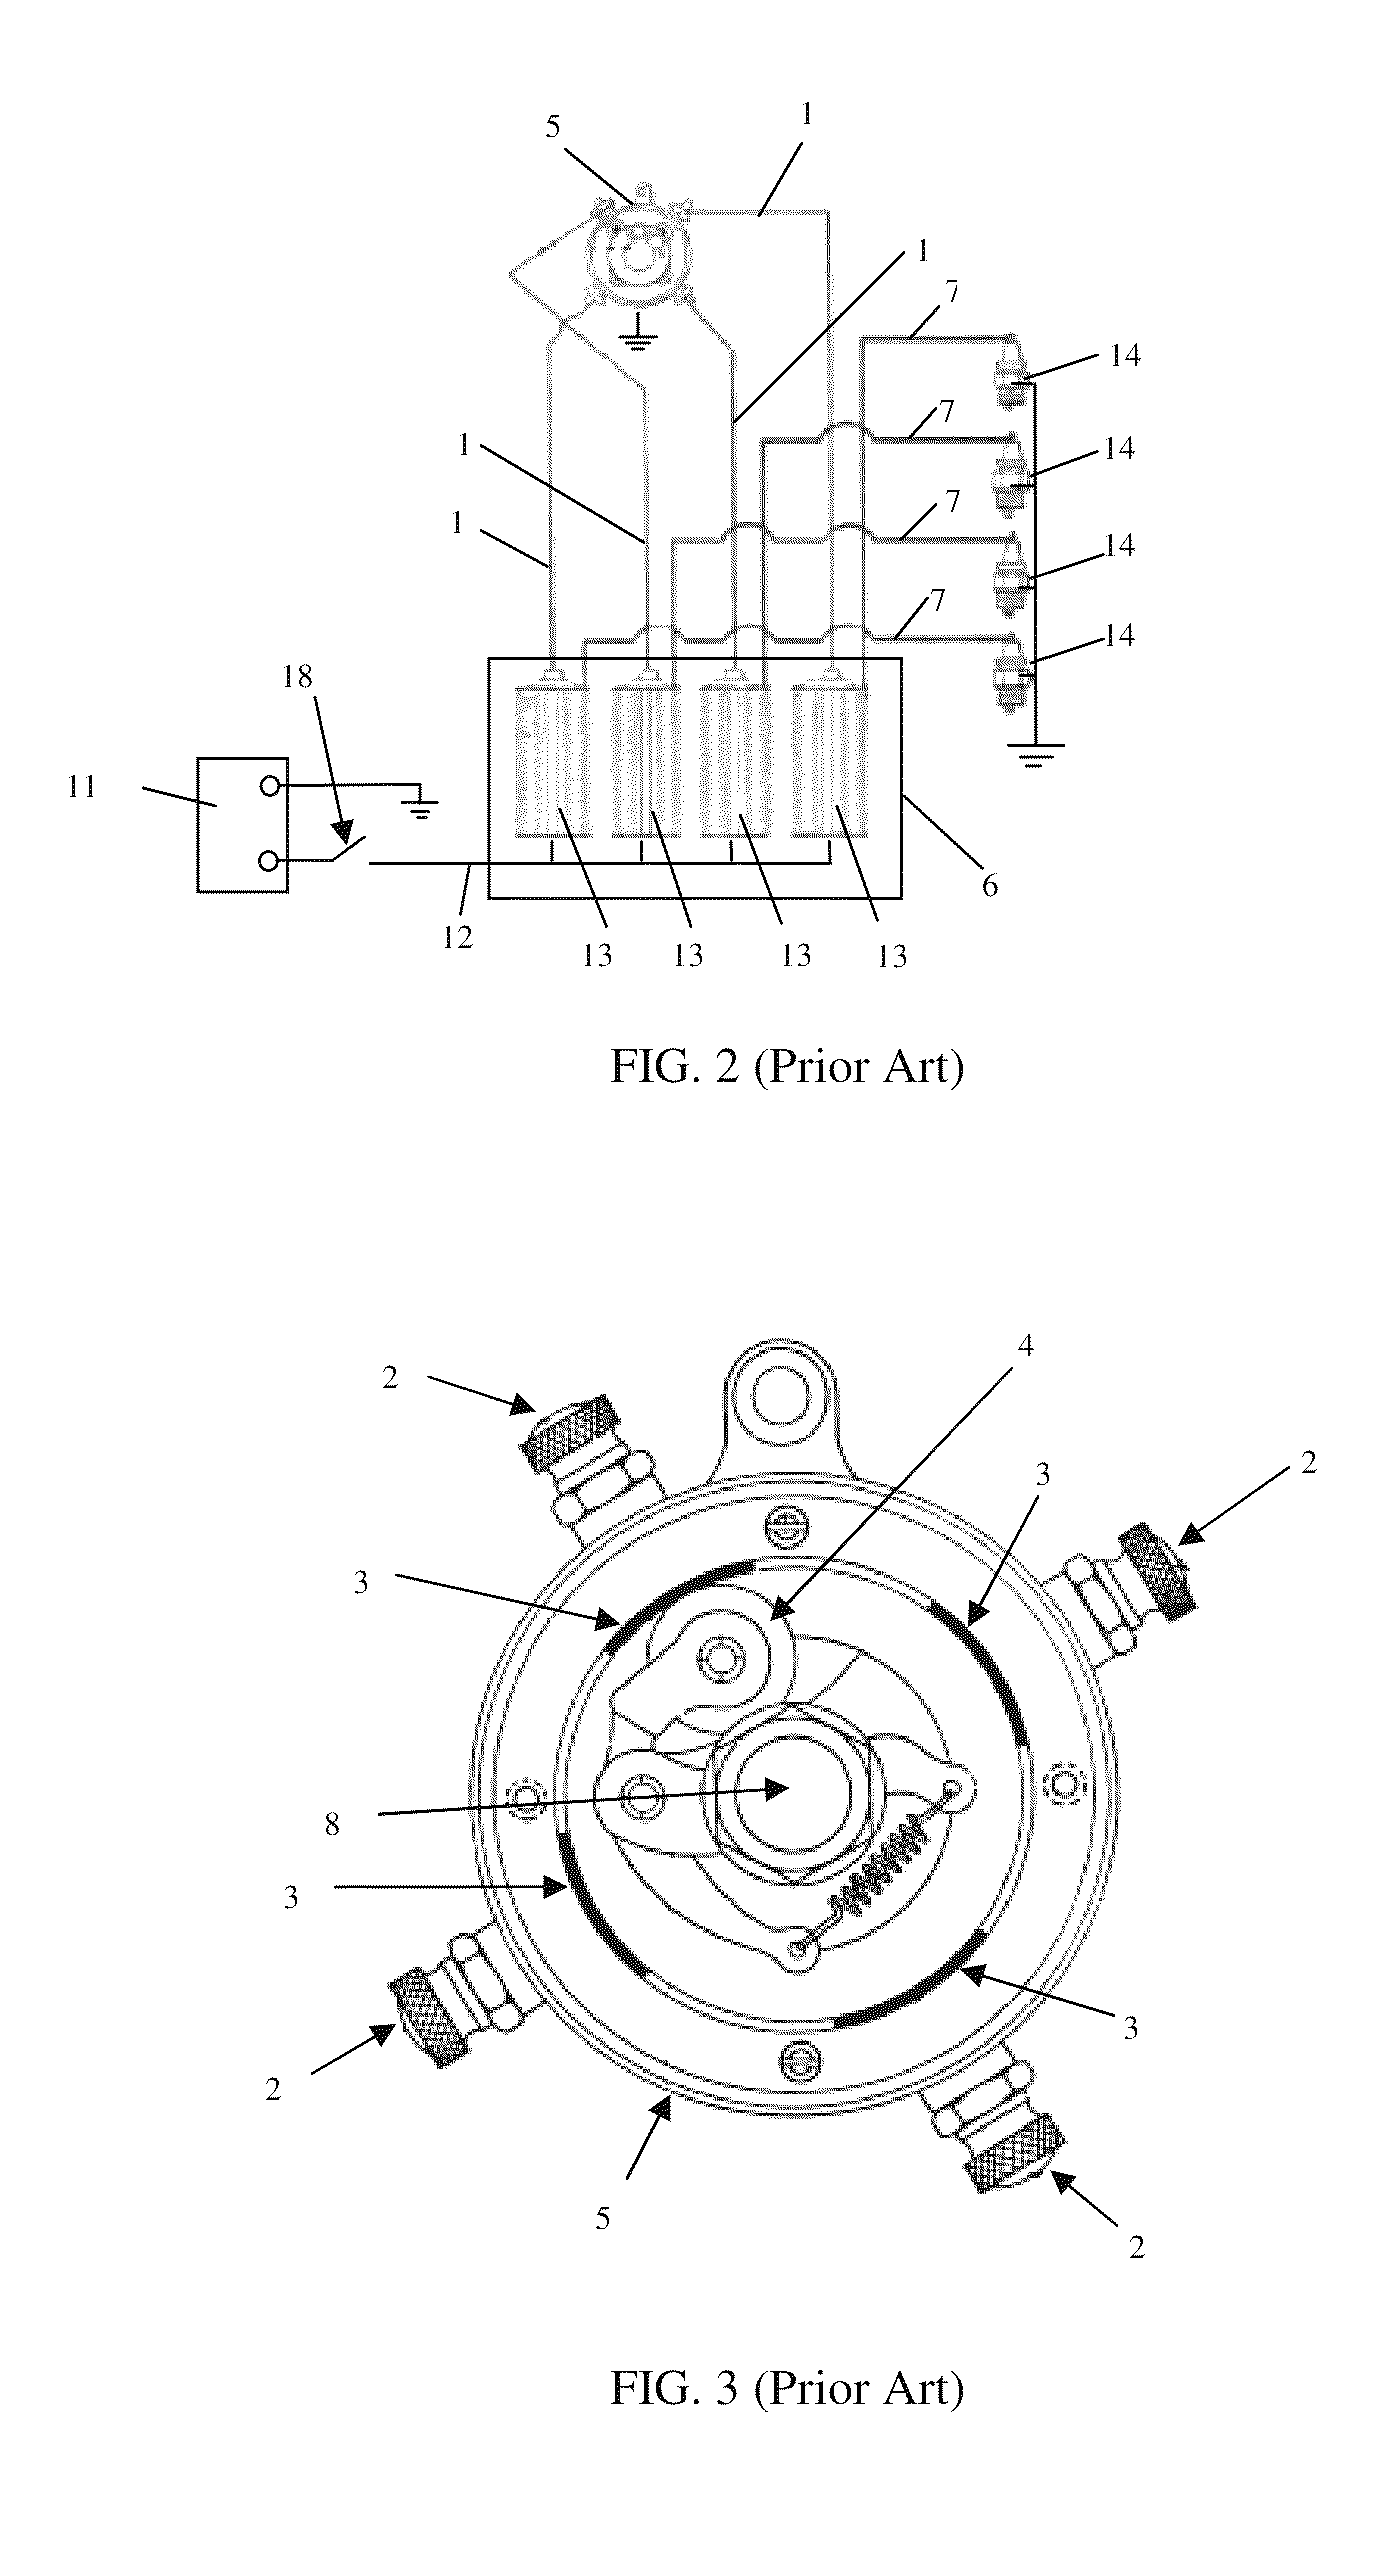 Method and apparatus for providing electronic ignition of early automobile engines